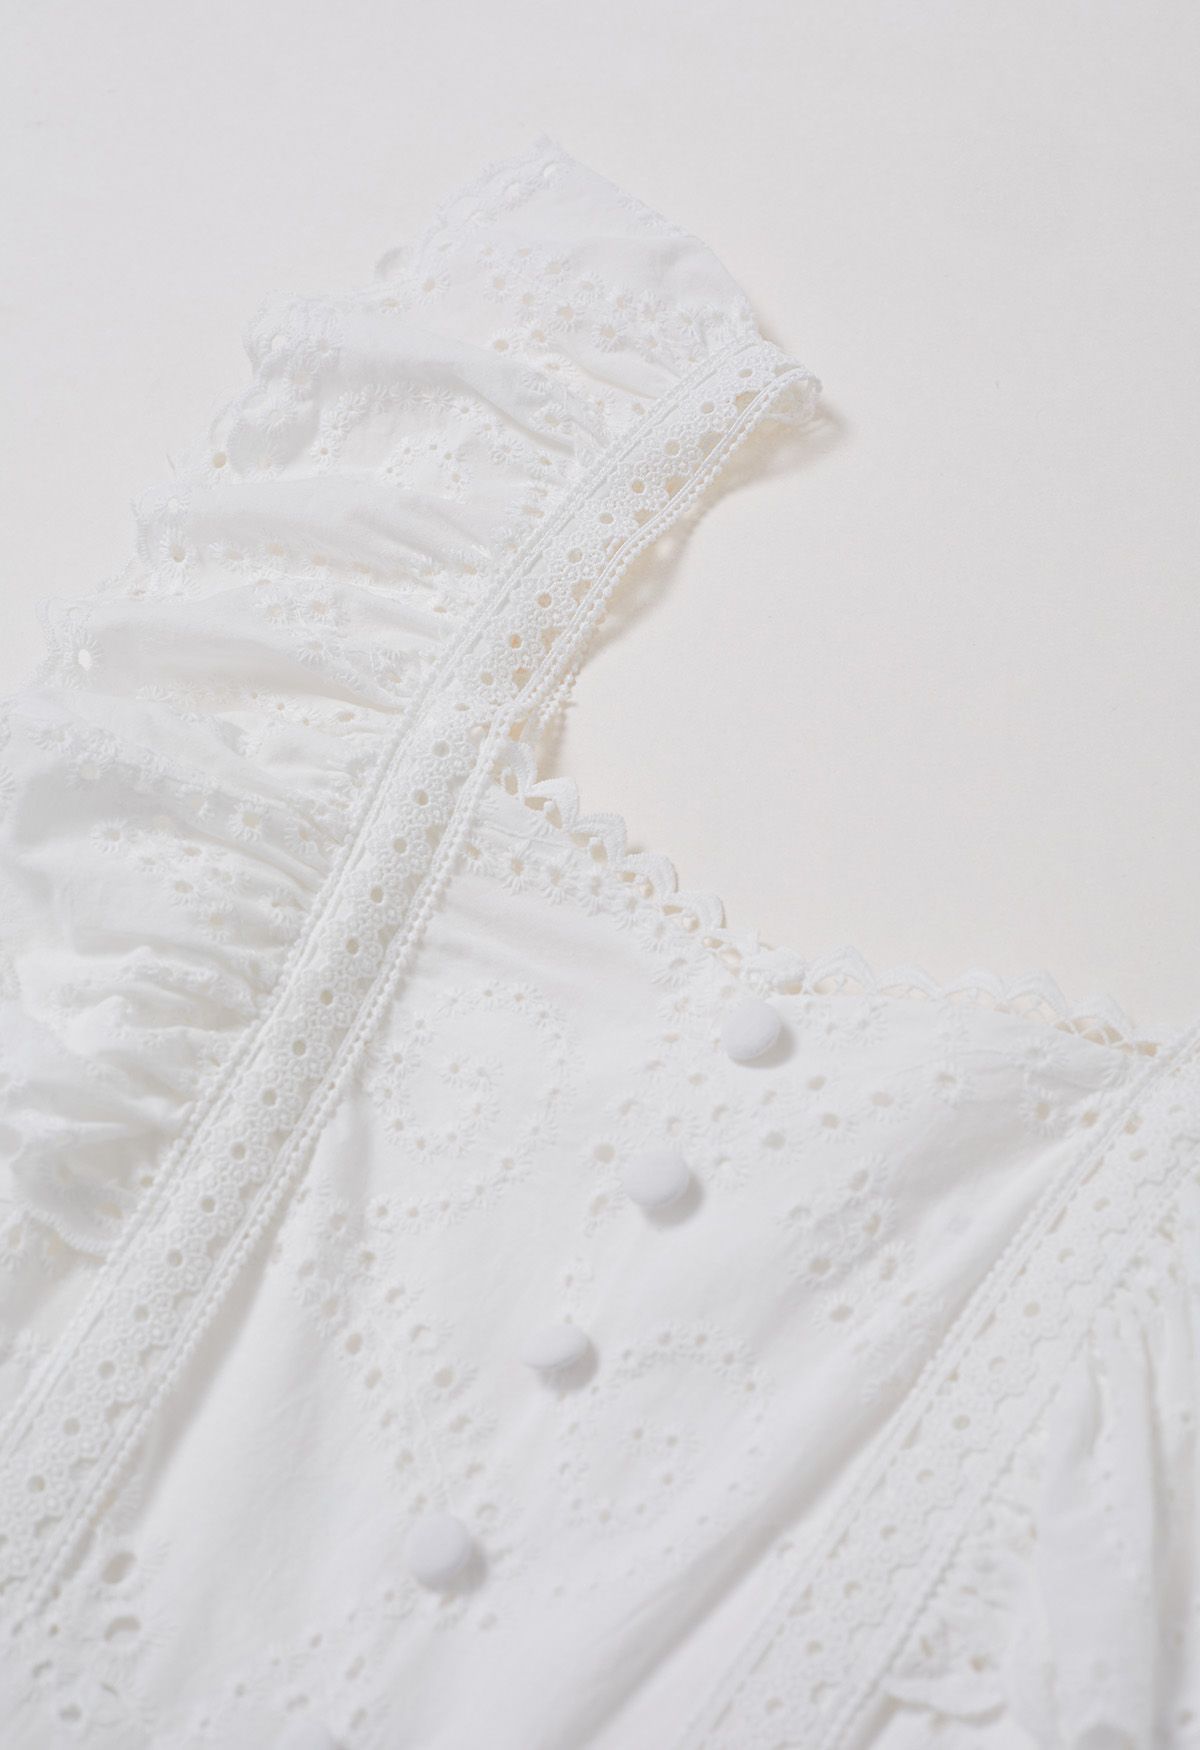 Sweetheart Neckline Eyelet Embroidery Maxi Dress in White